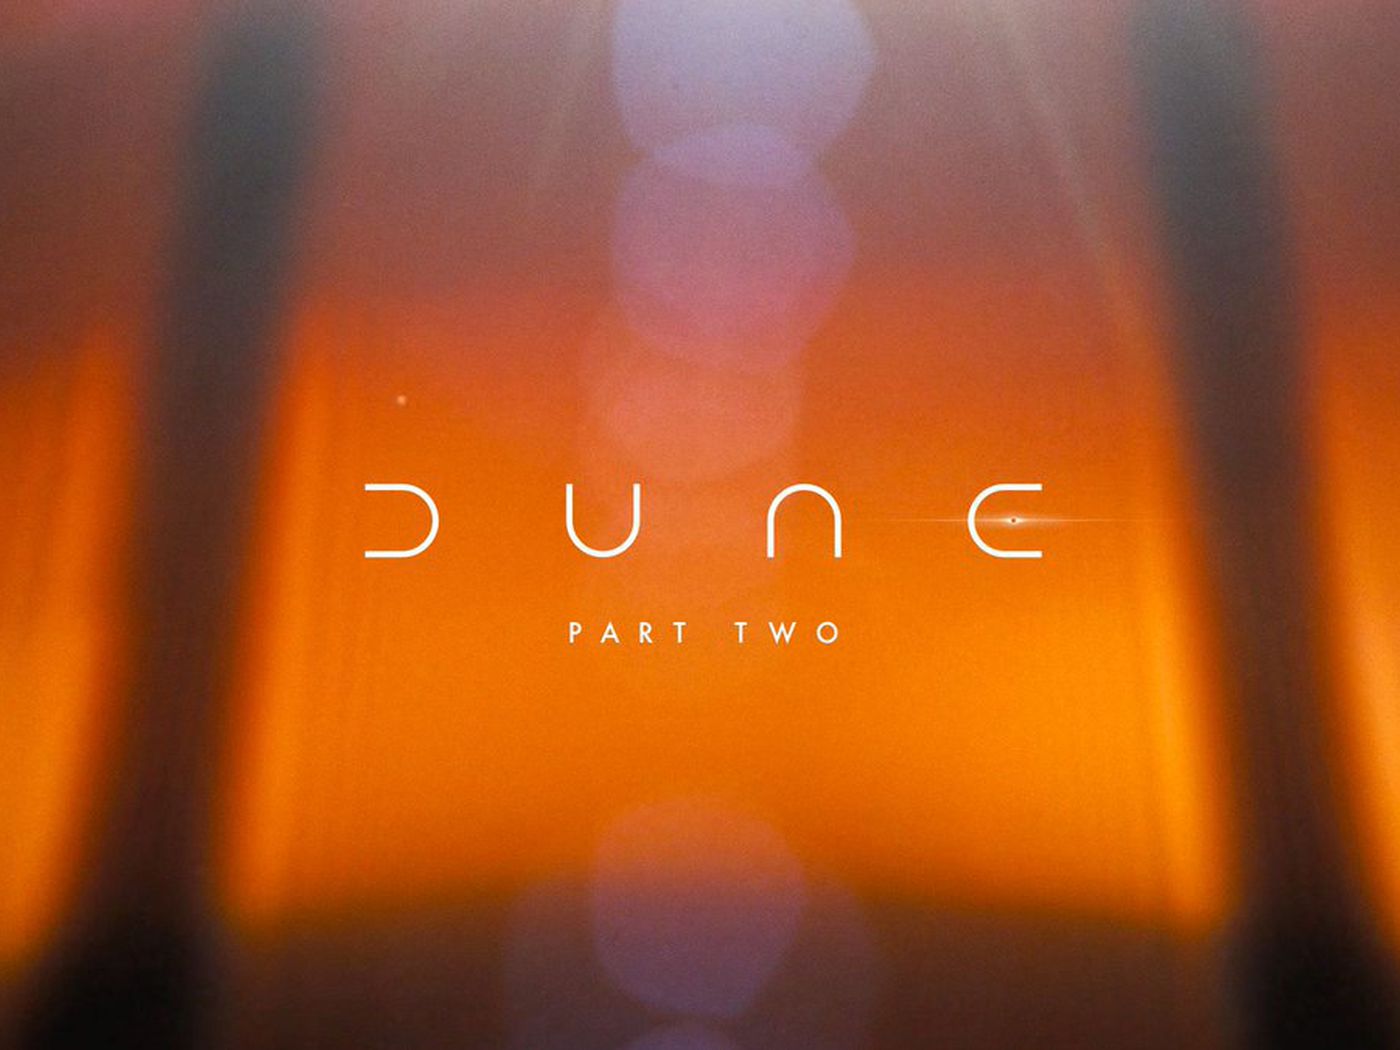 Dune part two announced by producers and image posted by timothée on instagram.